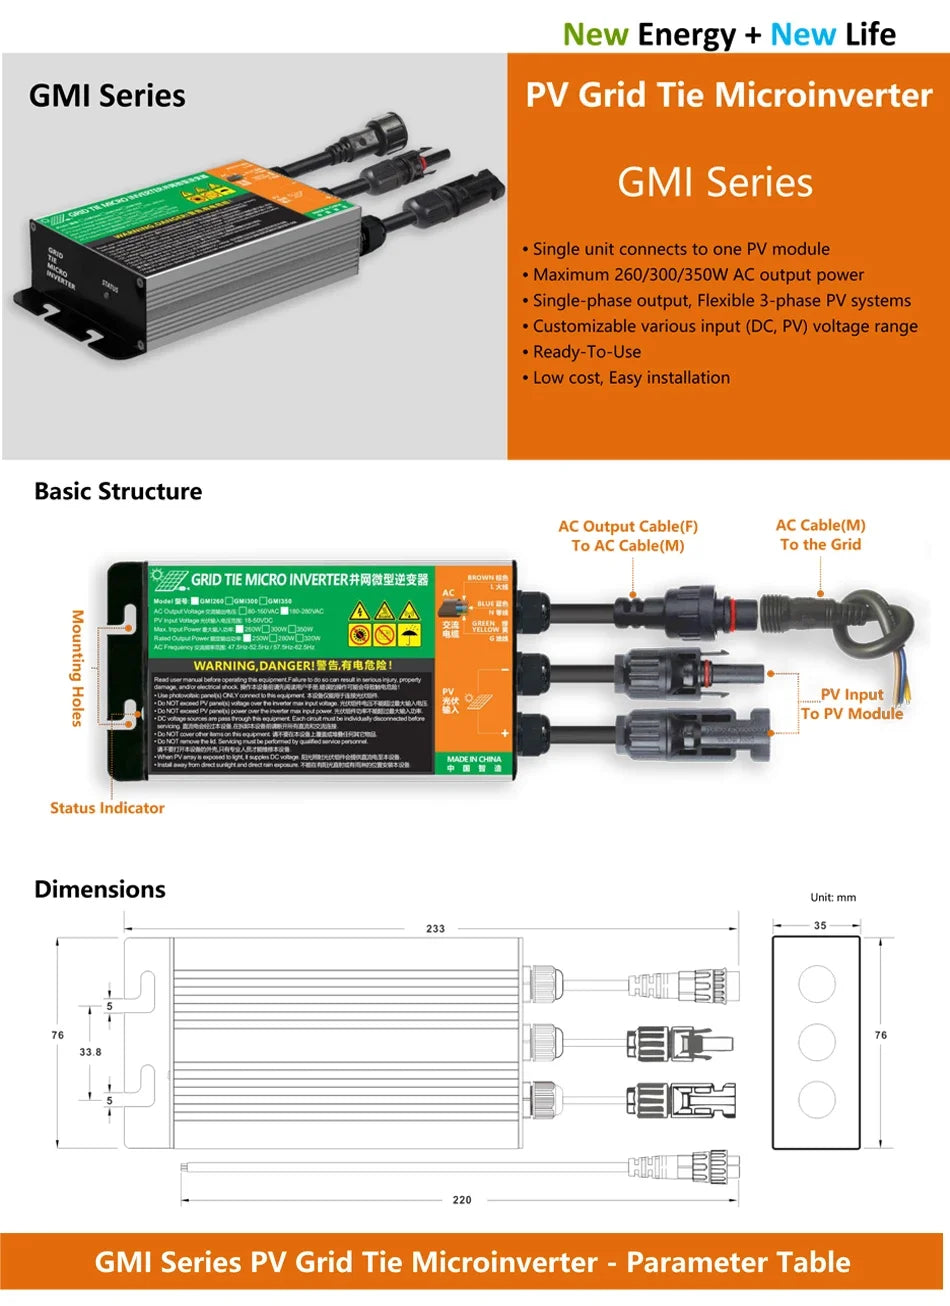 GMI Series MPPT Solar Grid Tie Micro Inverter: compact and cost-effective solution for small-scale solar systems.